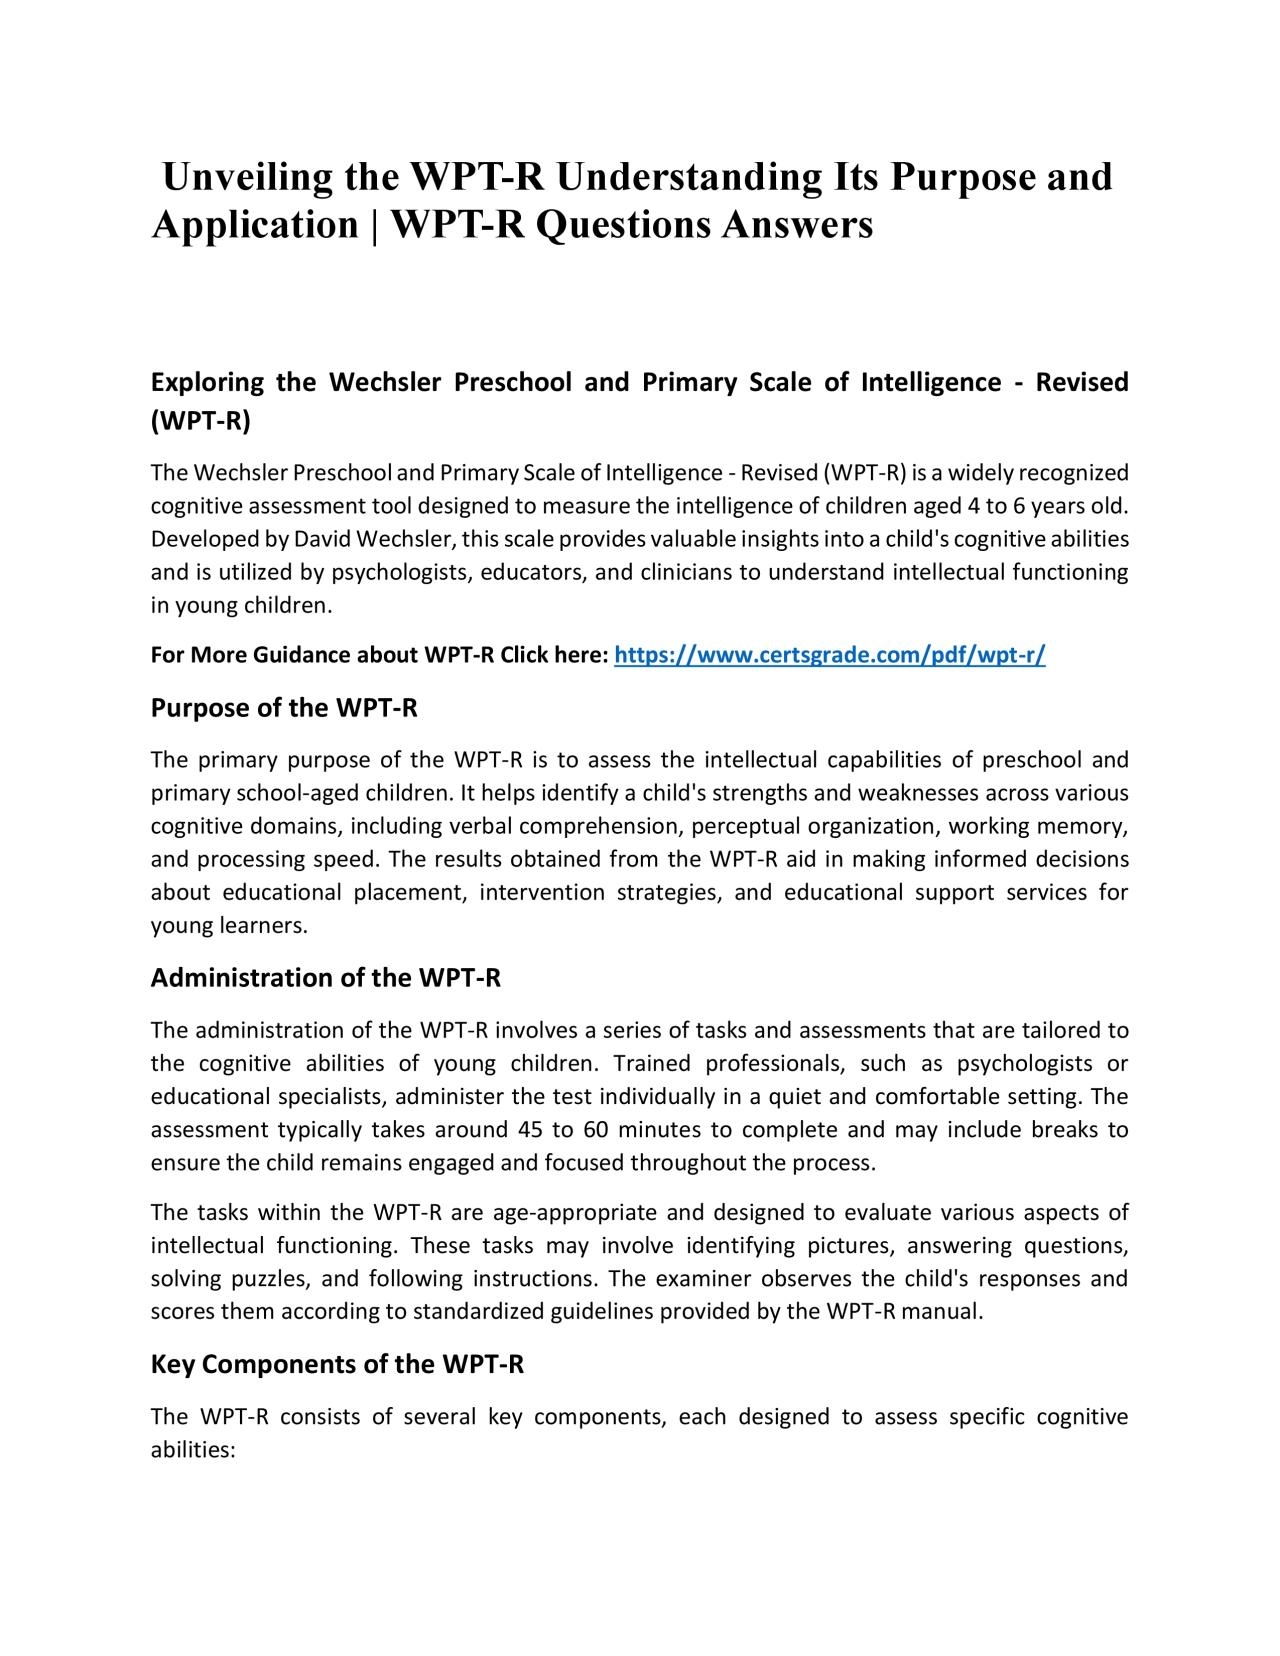 Unveiling the WPT-R Understanding Its Purpose and Application | WPT-R Questions Answers